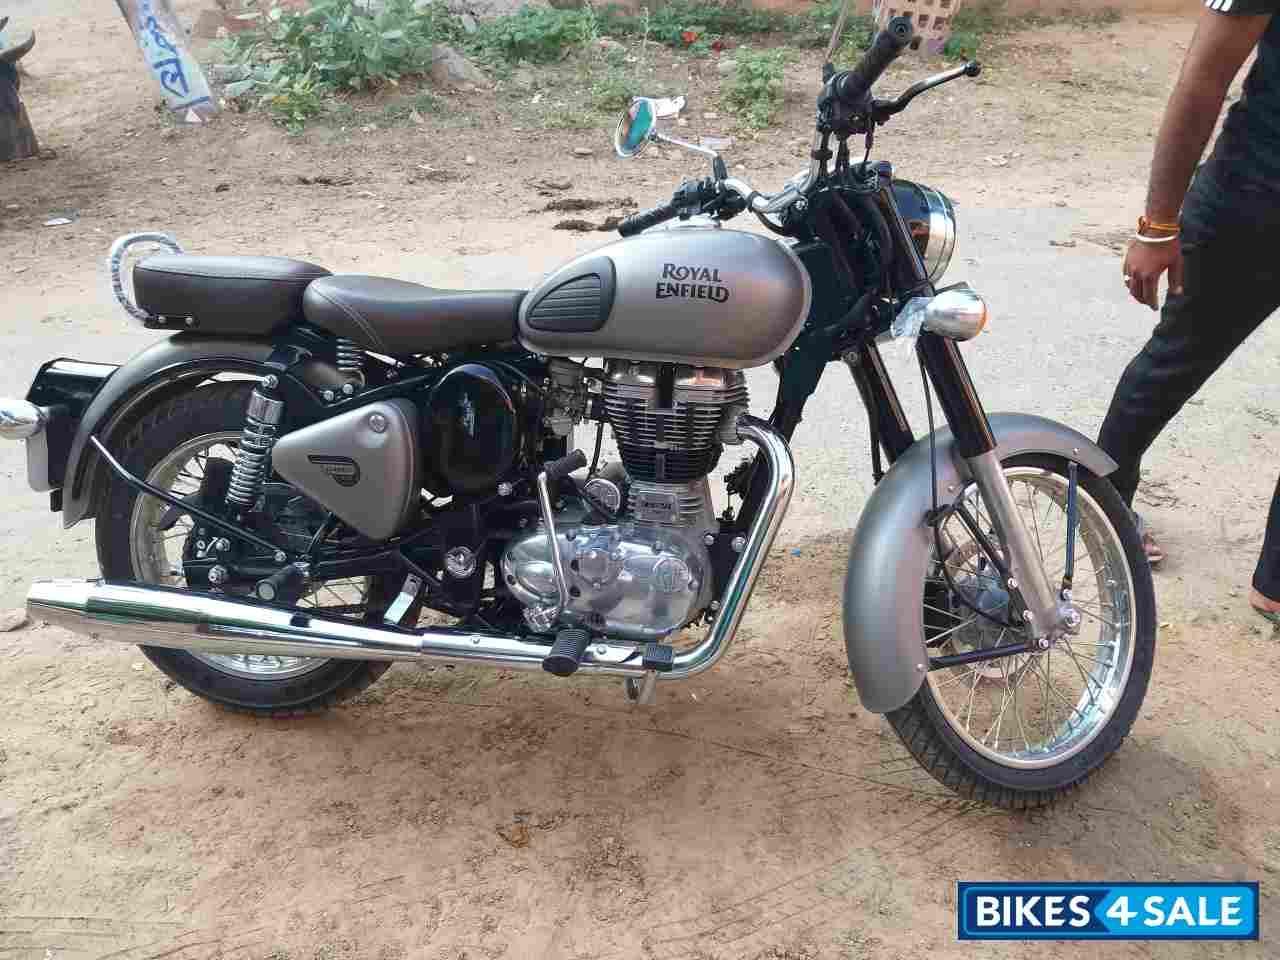 royal enfield second hand bike price